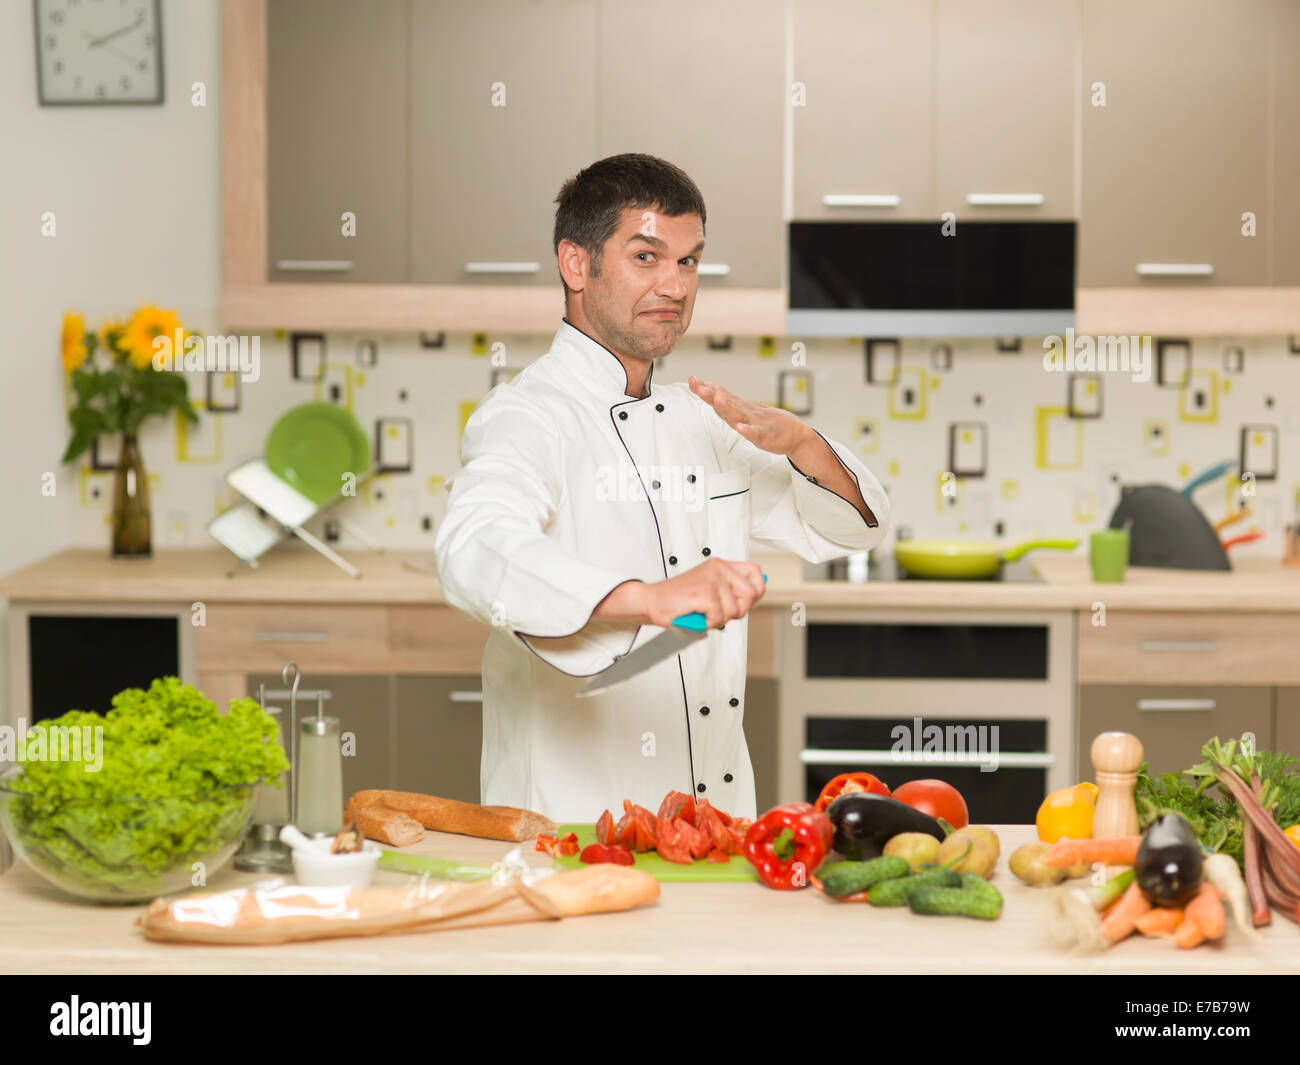 caucasian chef, standing in front of kitchen table with vegetables ...